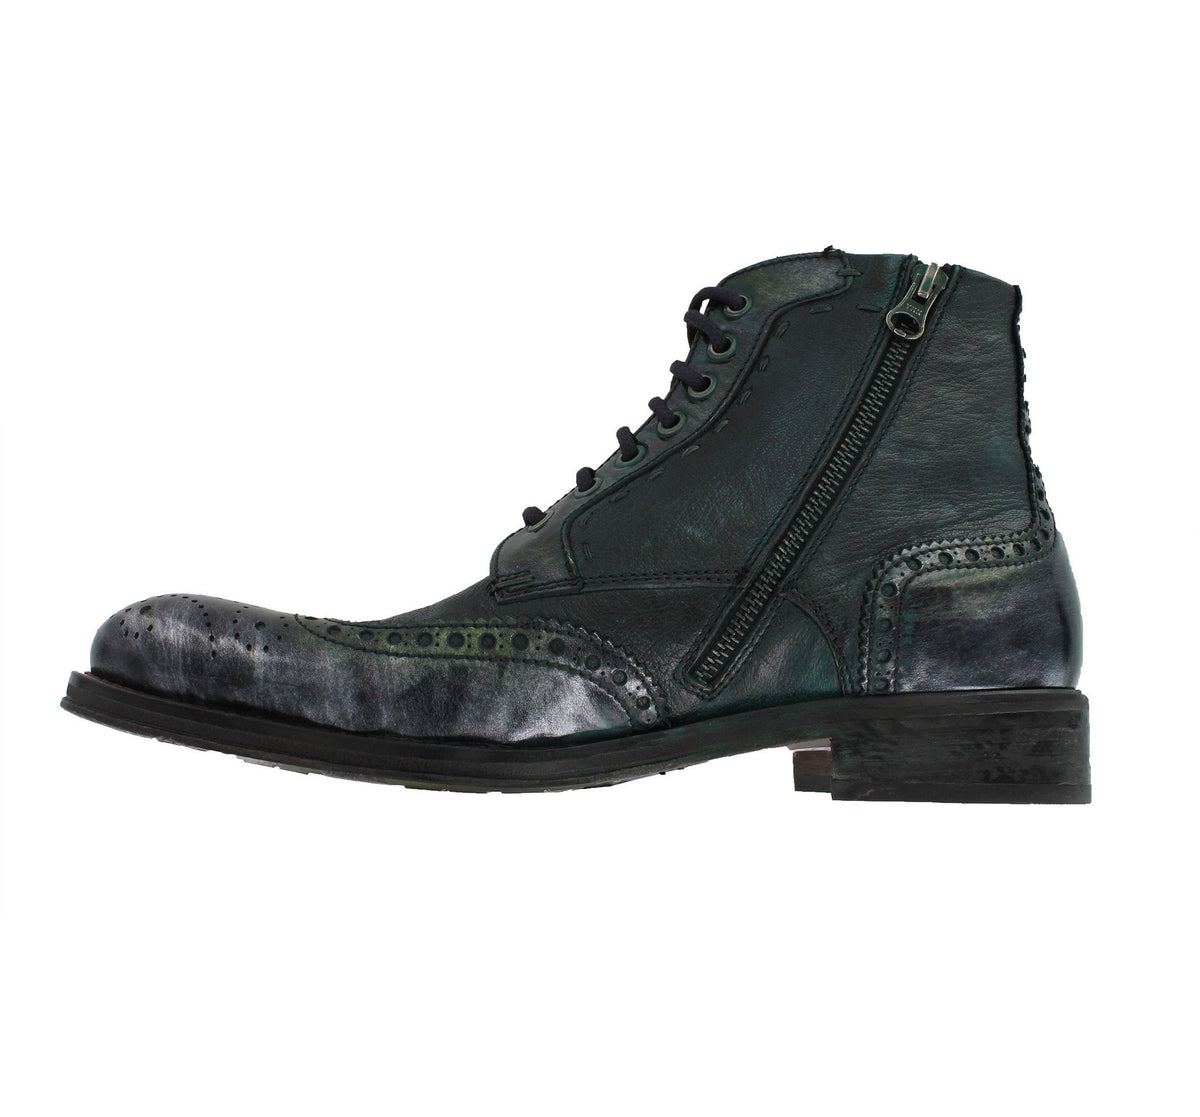 6320 - Green Blue With Metallic leather Toe Cap